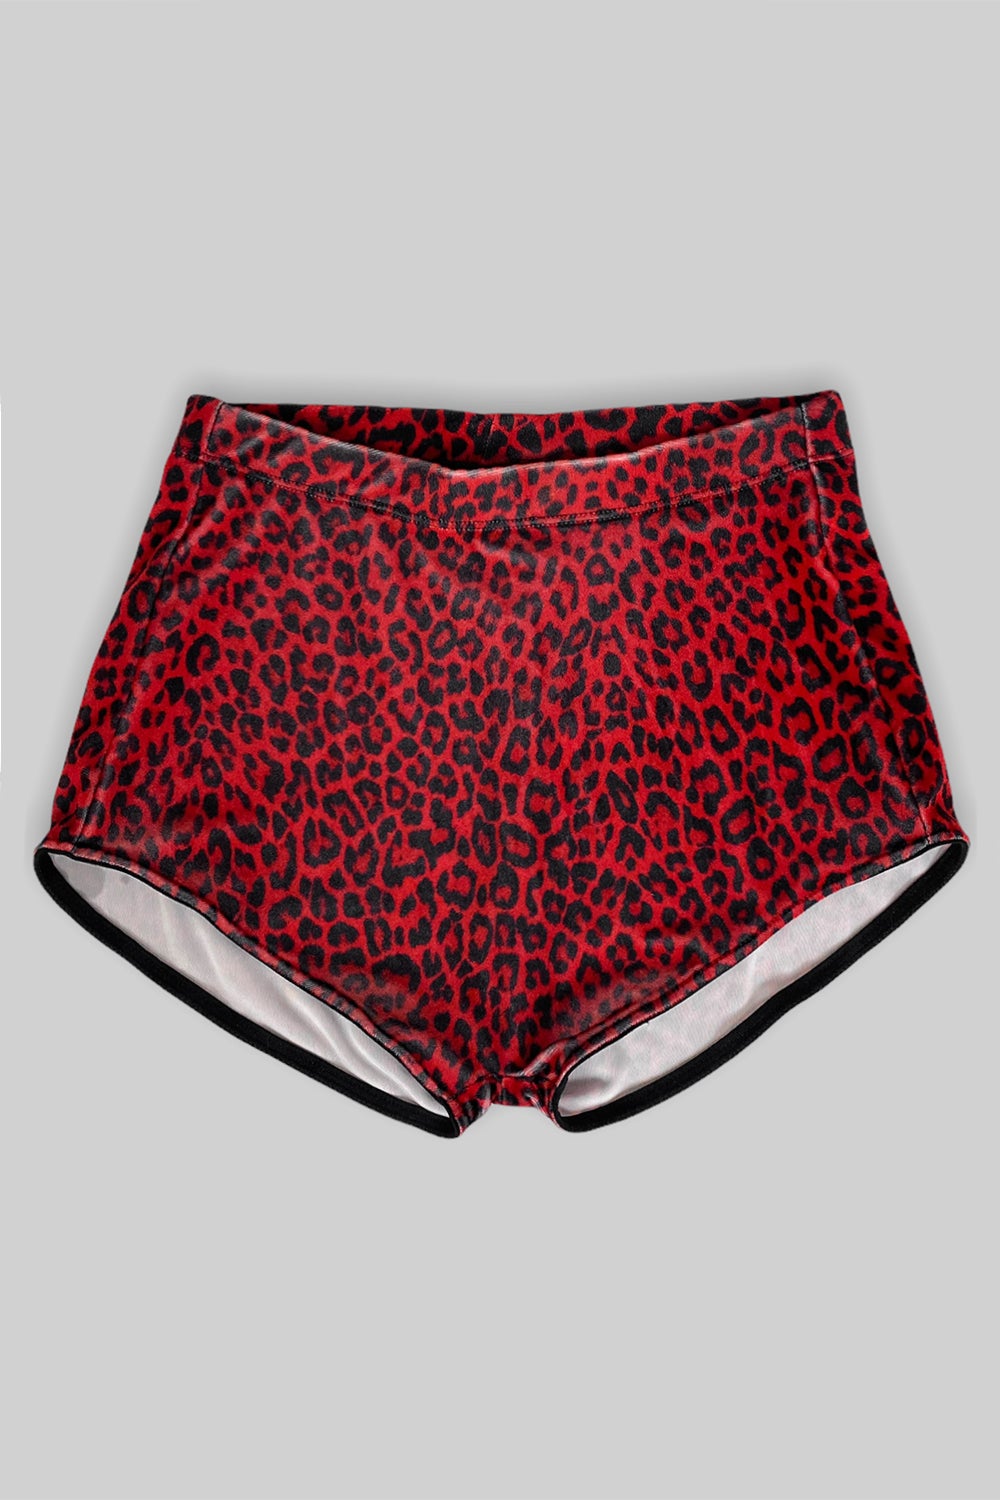 Red Leopard Hot Shorts | M In Stock